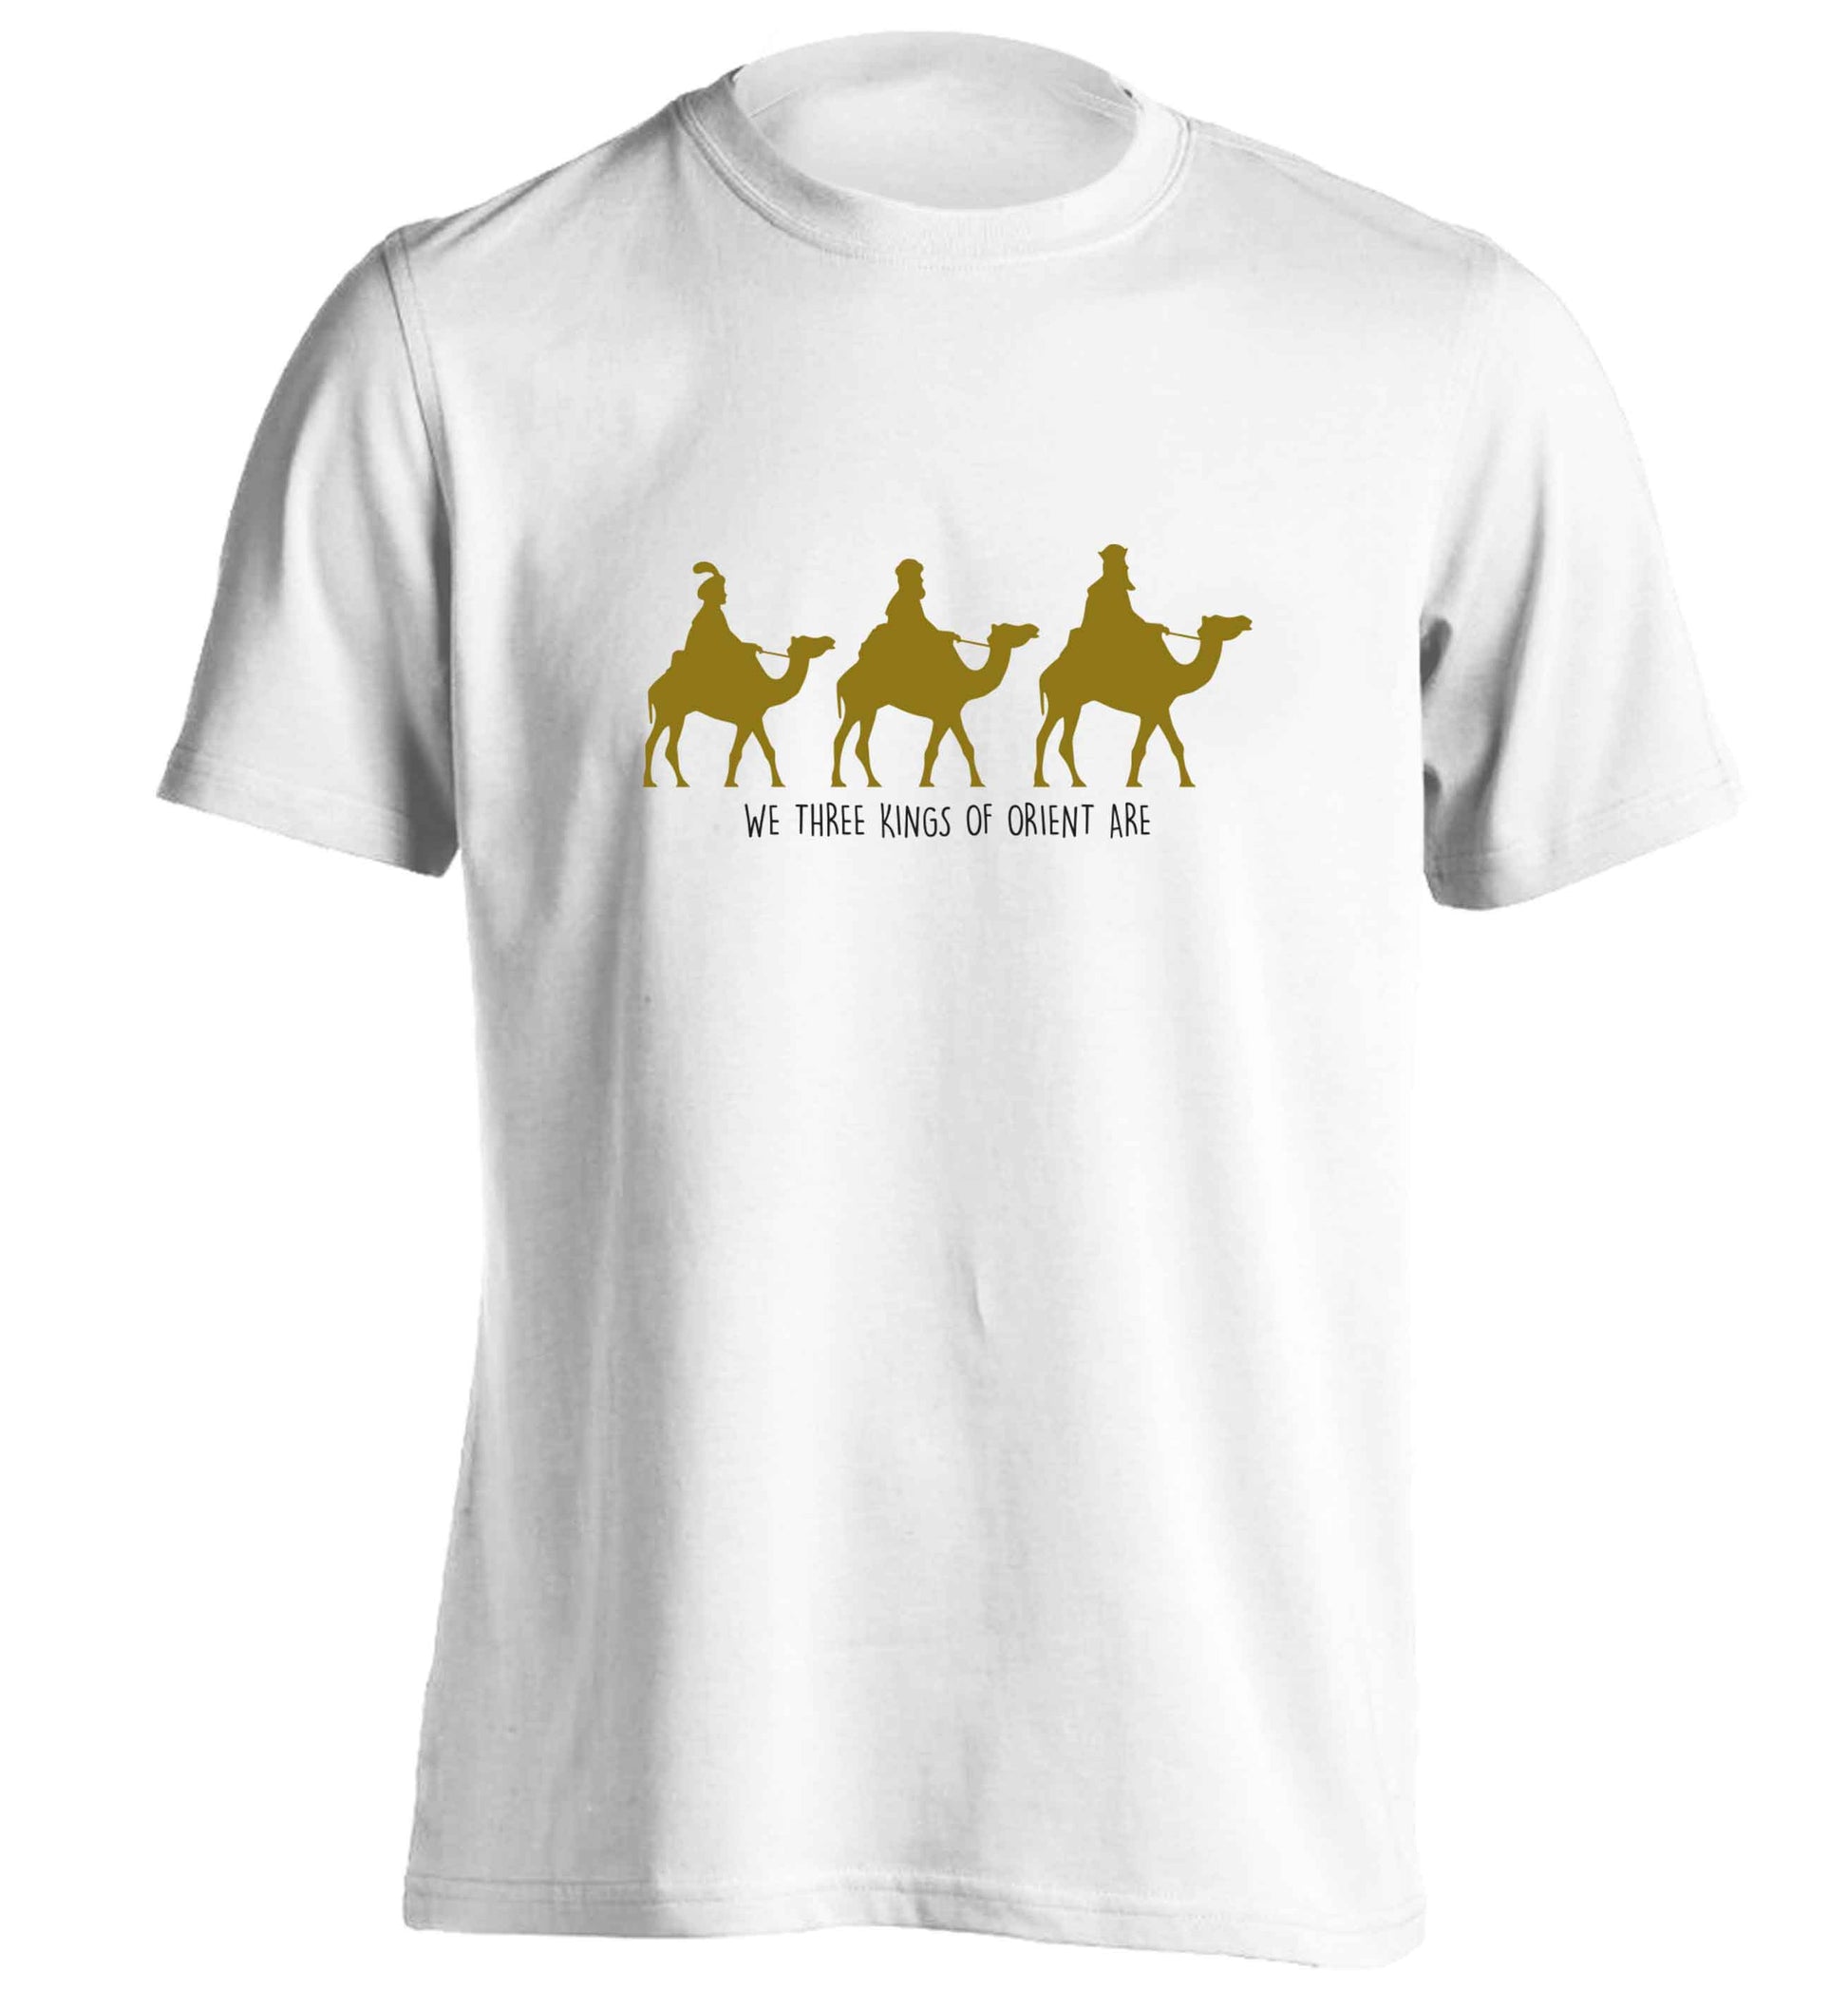 We three kings of orient are adults unisex white Tshirt 2XL